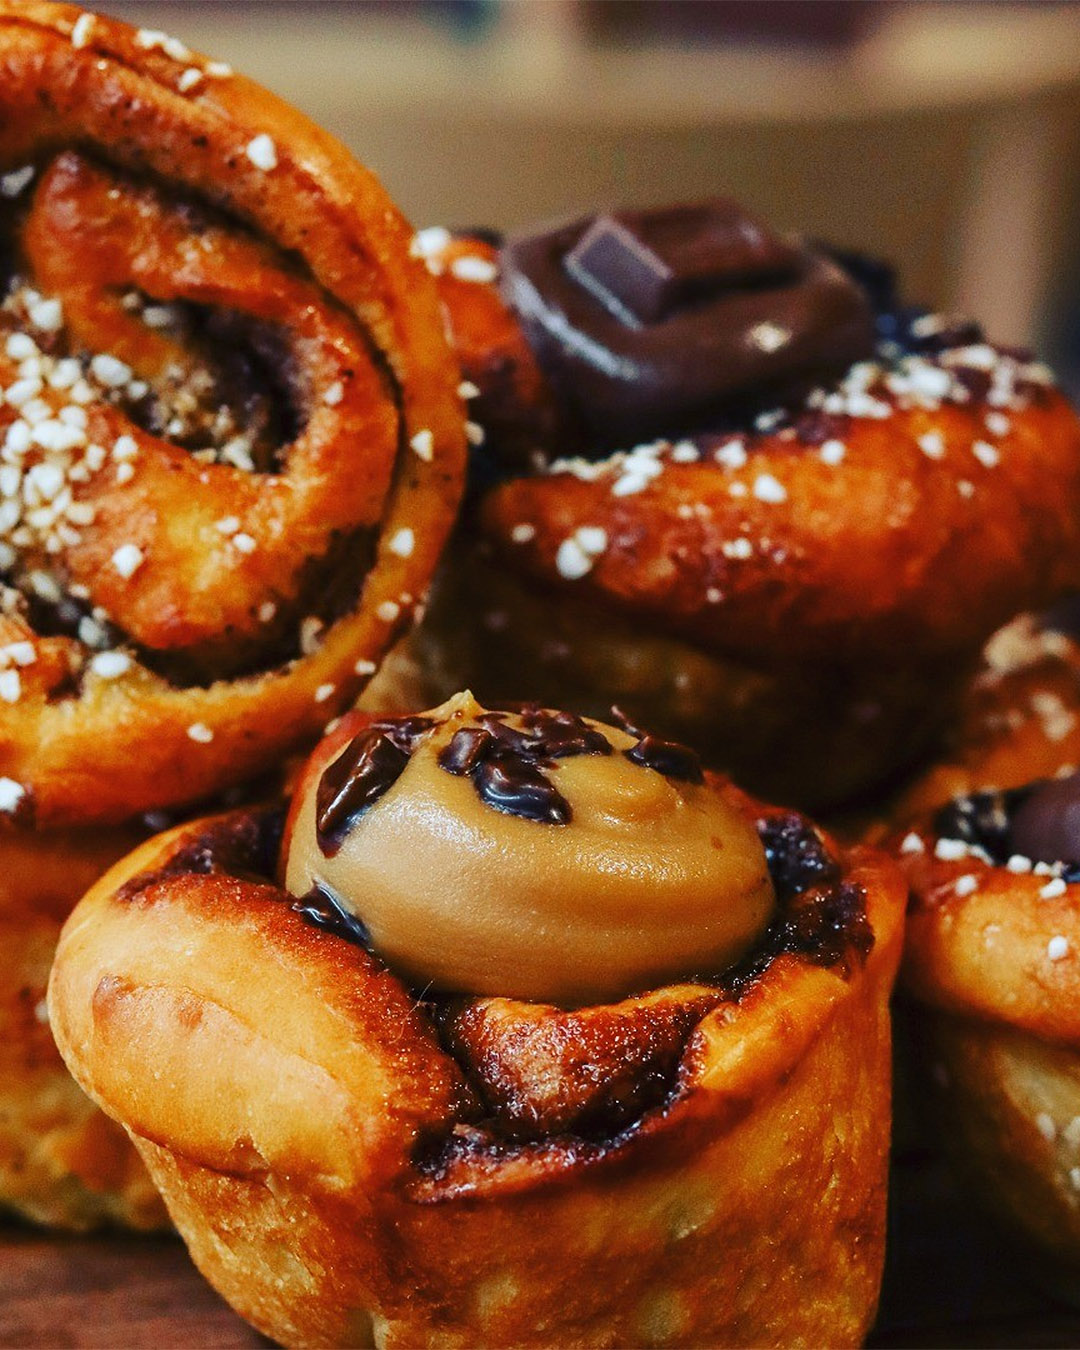 A heaping stack of cinnamon buns from Scandibunz.